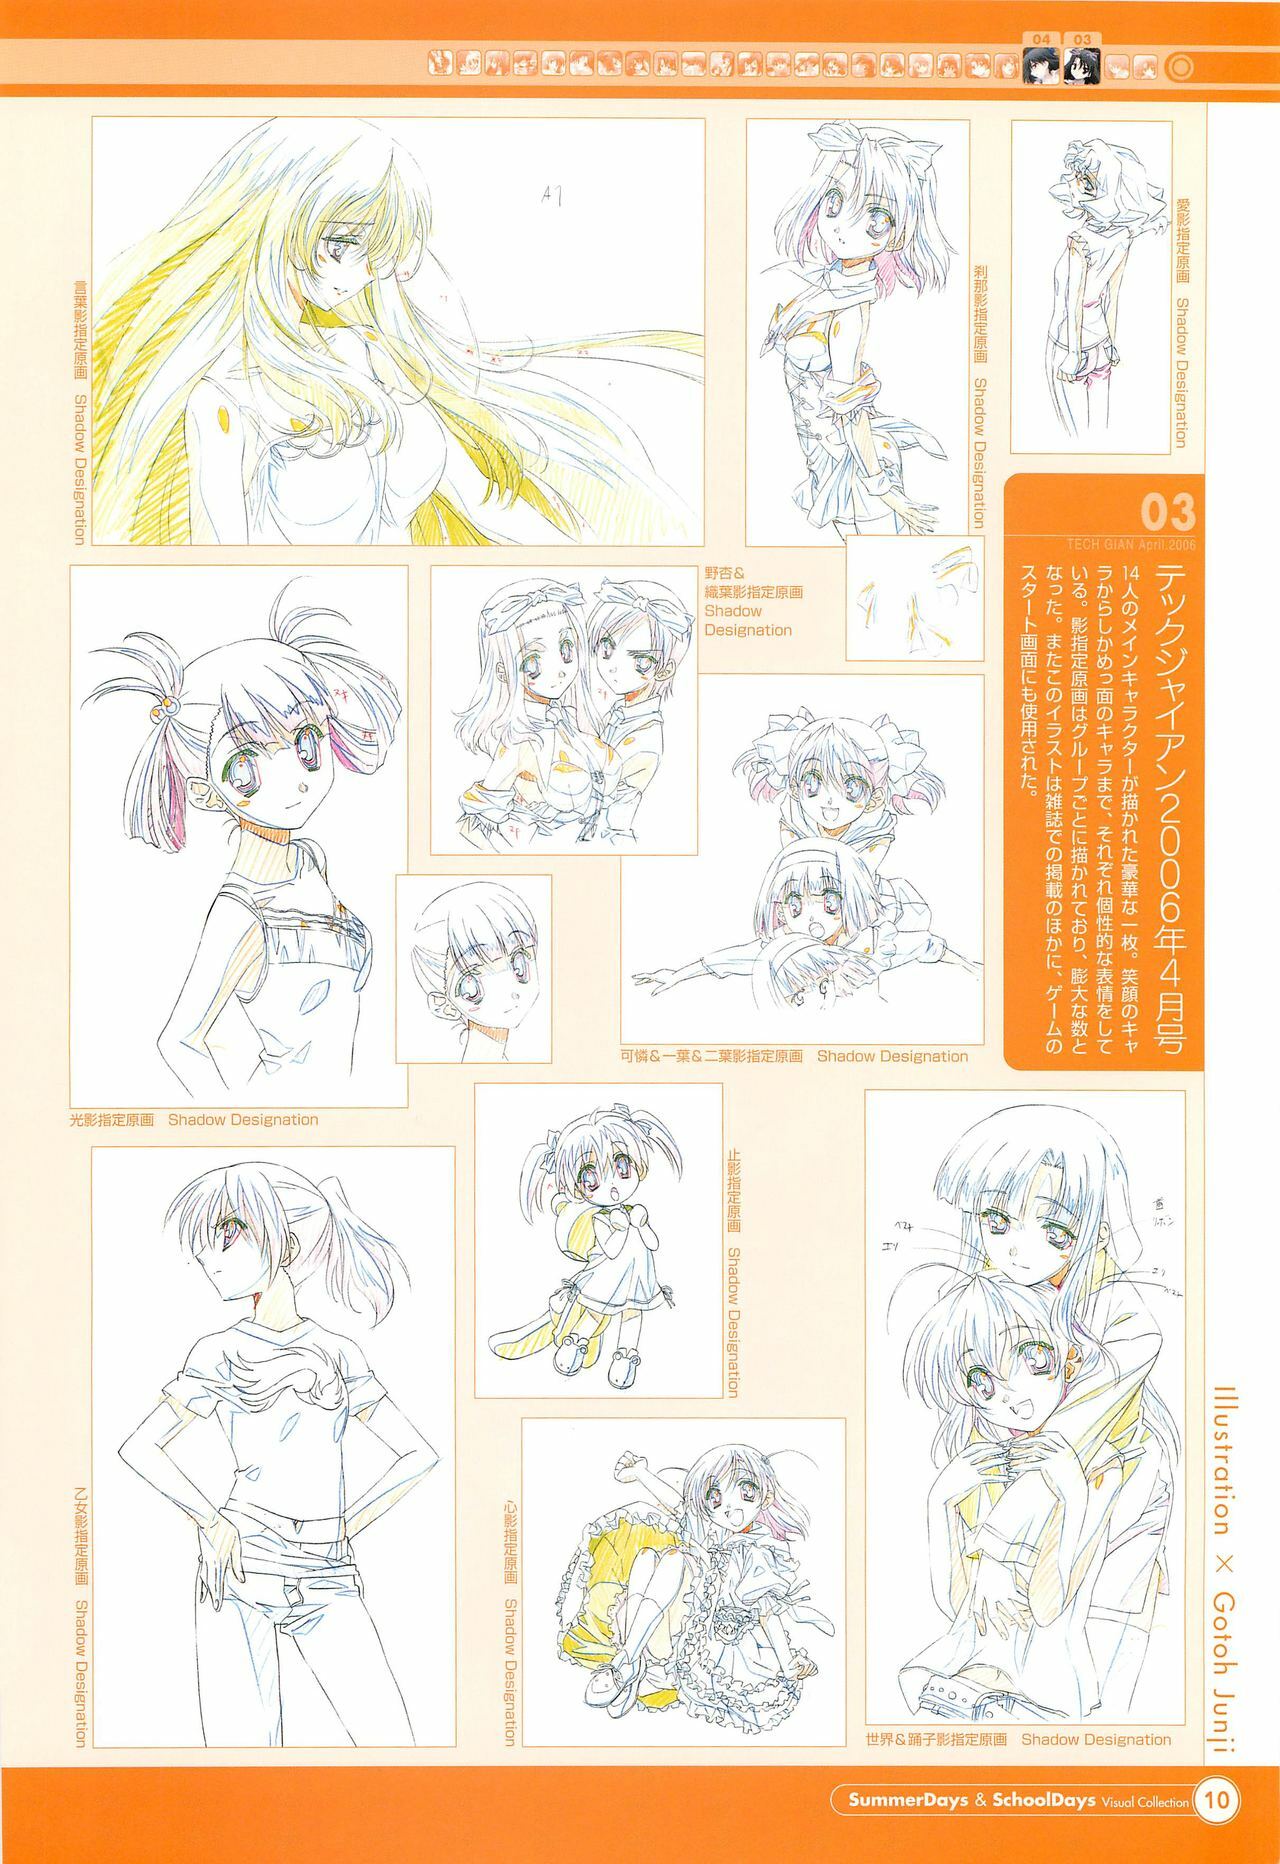 SummerDays & School Days Visual Collection page 12 full